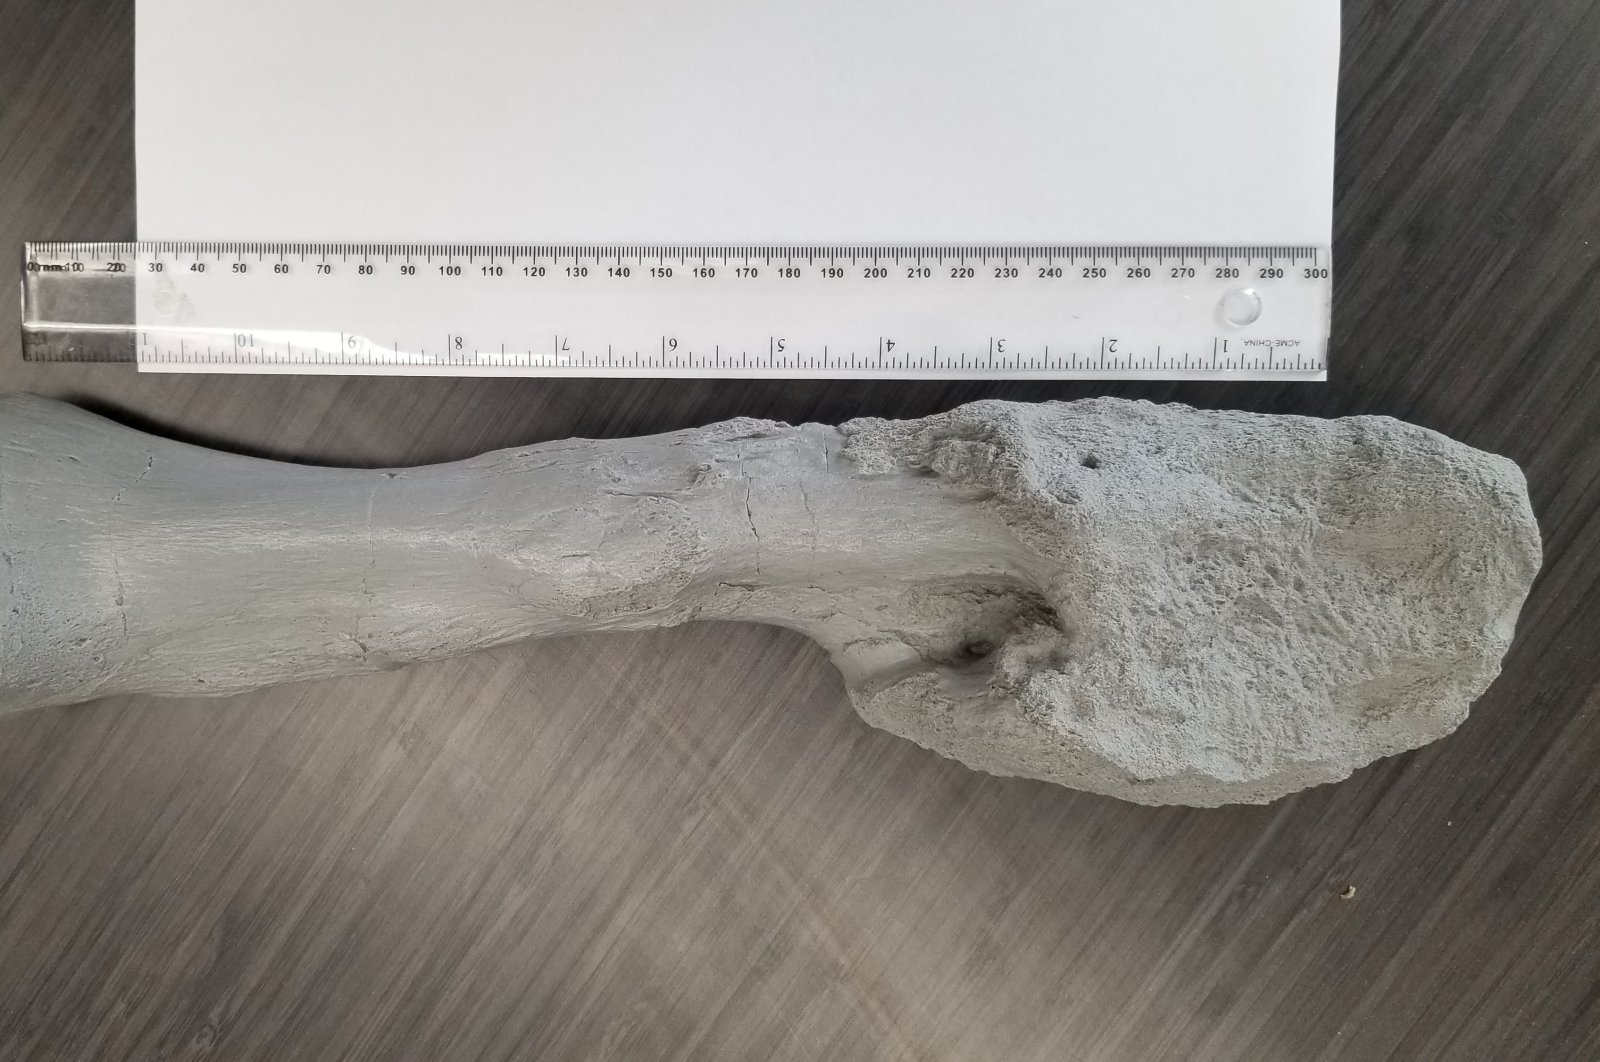 A cast of the fibula – lower leg bone – from Centrosaurus apertus, a horned dinosaur that lived 76 million years ago in the Canadian province of Alberta,  is seen disfigured by aggressive malignant bone cancer – an osteosarcoma Ð in this image released on Aug. 3, 2020. (Mark Crowther/Handout via Reuters)